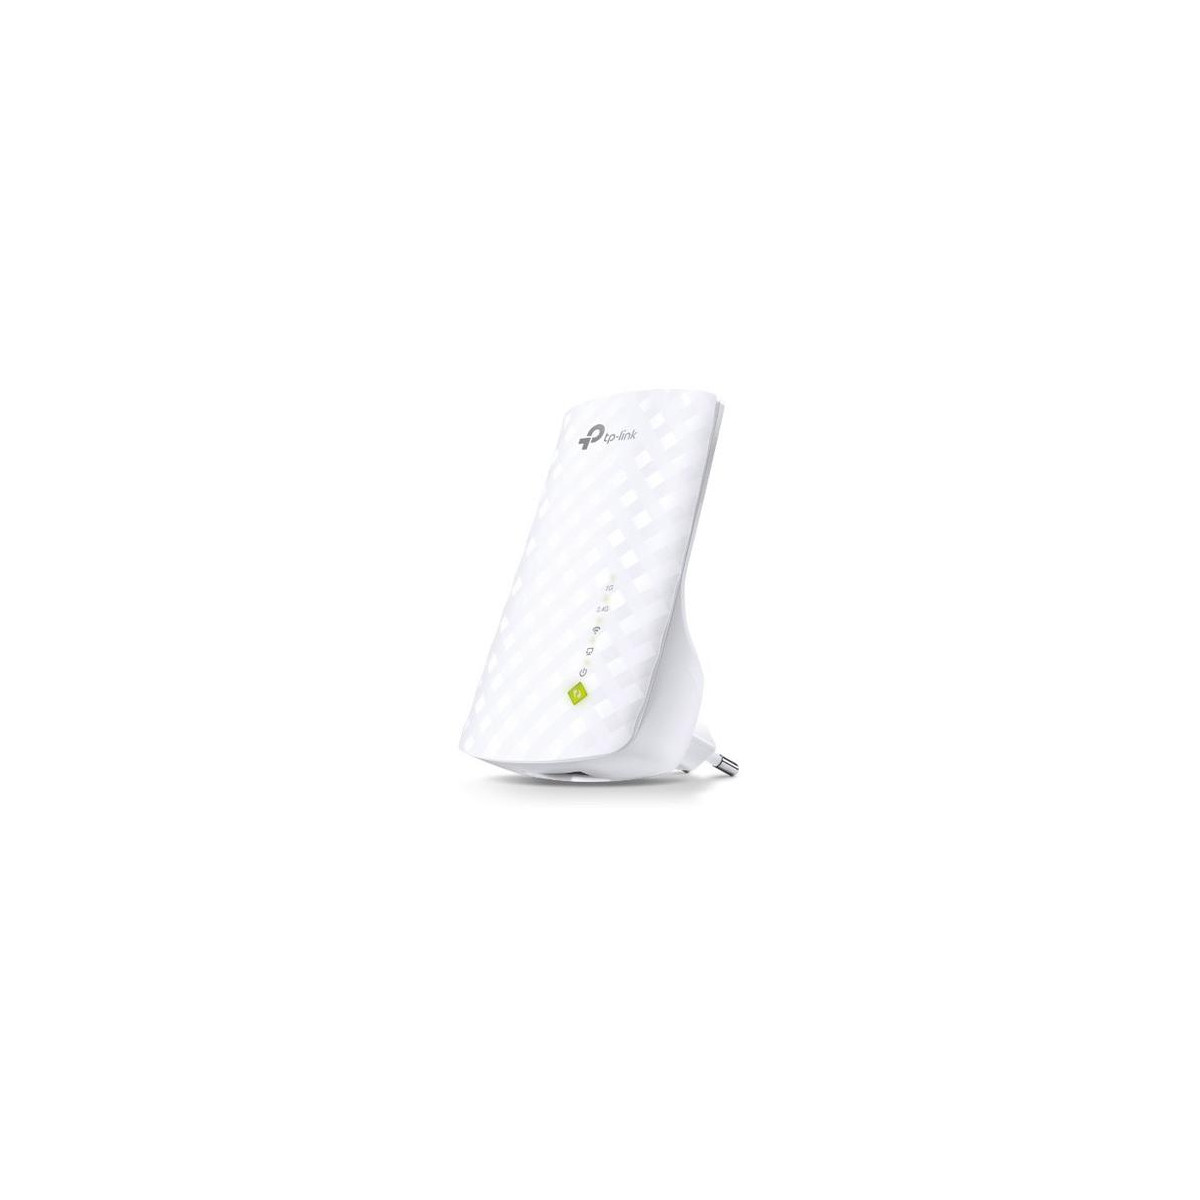 More about Repeater TP-LINK RE200